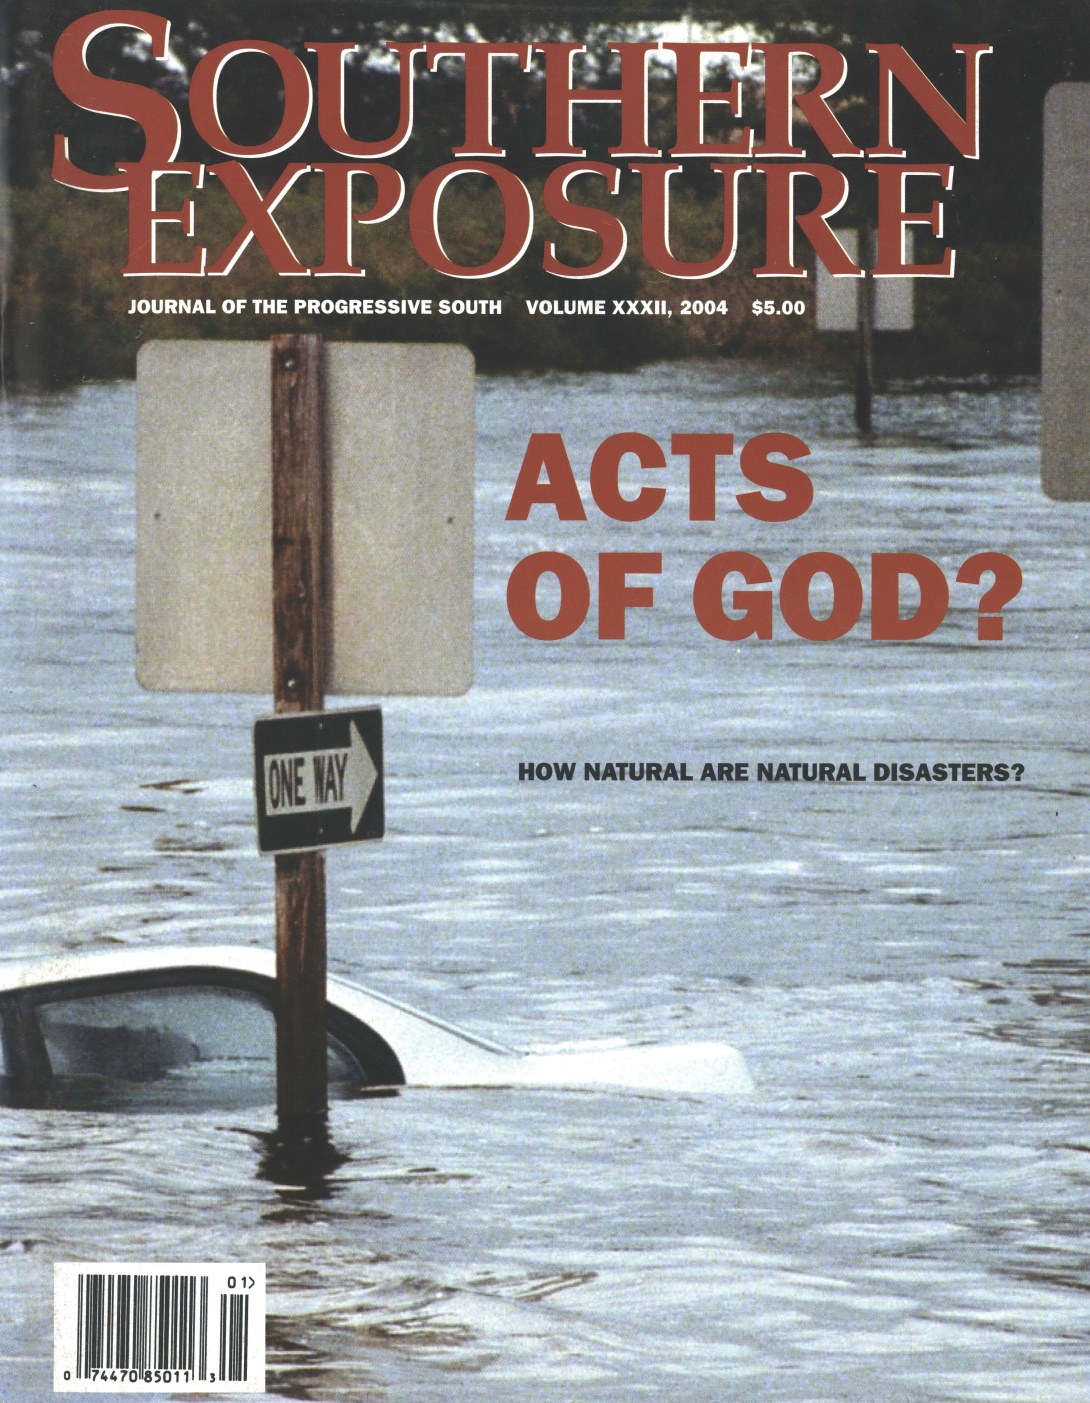 Magazine cover with photo of car under floodwaters; text reads "Acts of God? How Natural are Natural Disasters?"